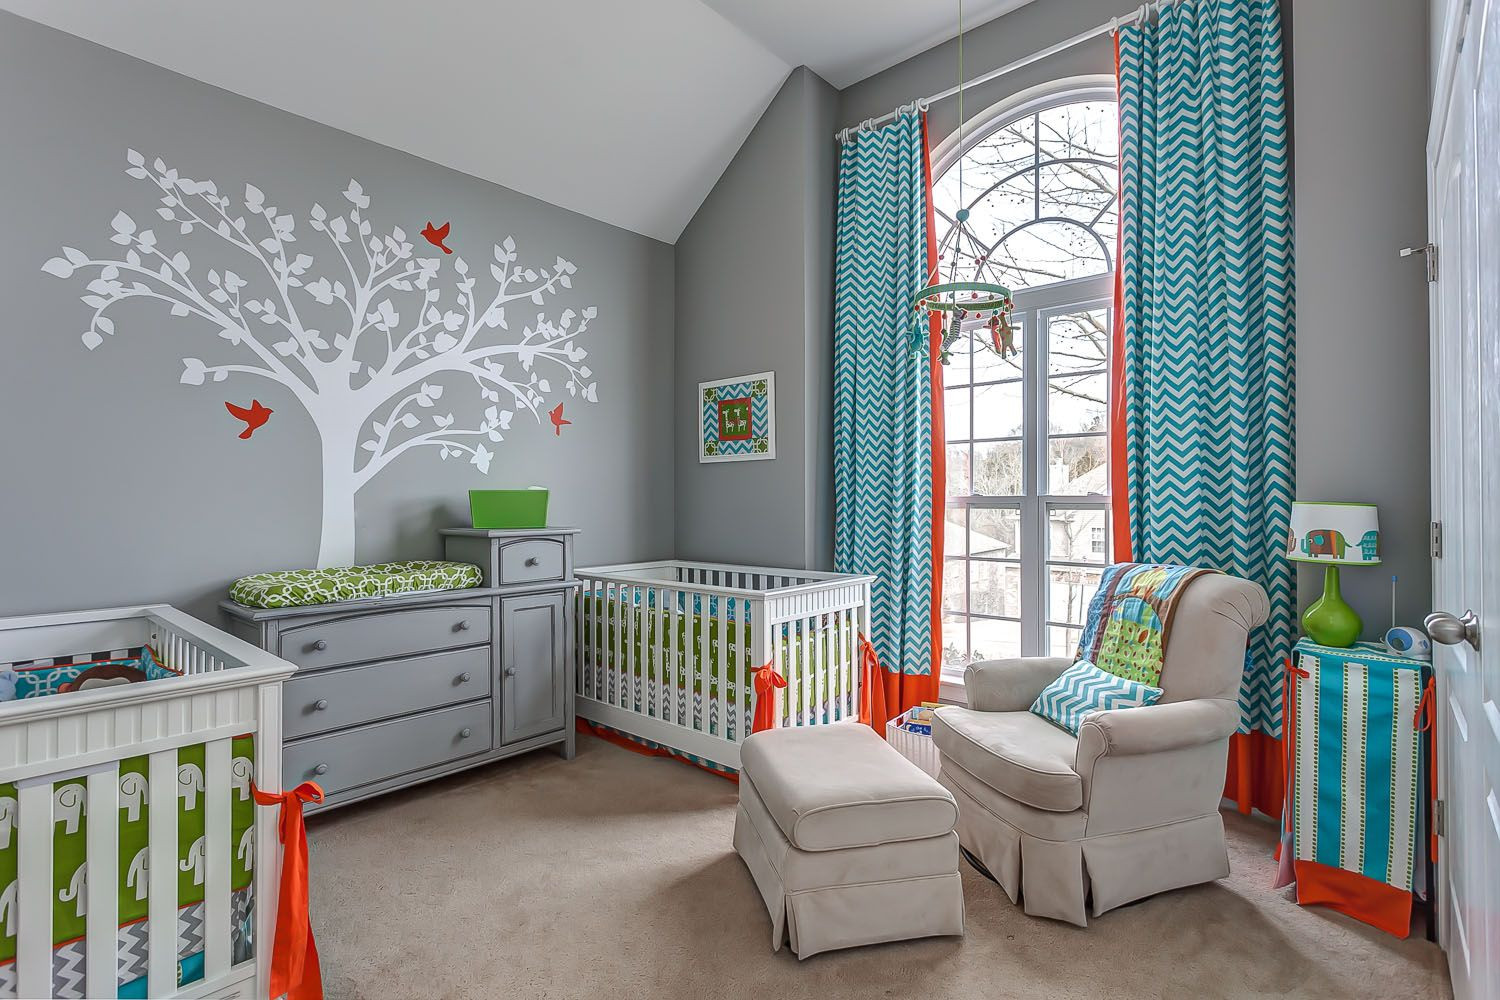 Twins Baby Room Decorating Ideas
 Twin Boy Nursery amazing colour scheme With images